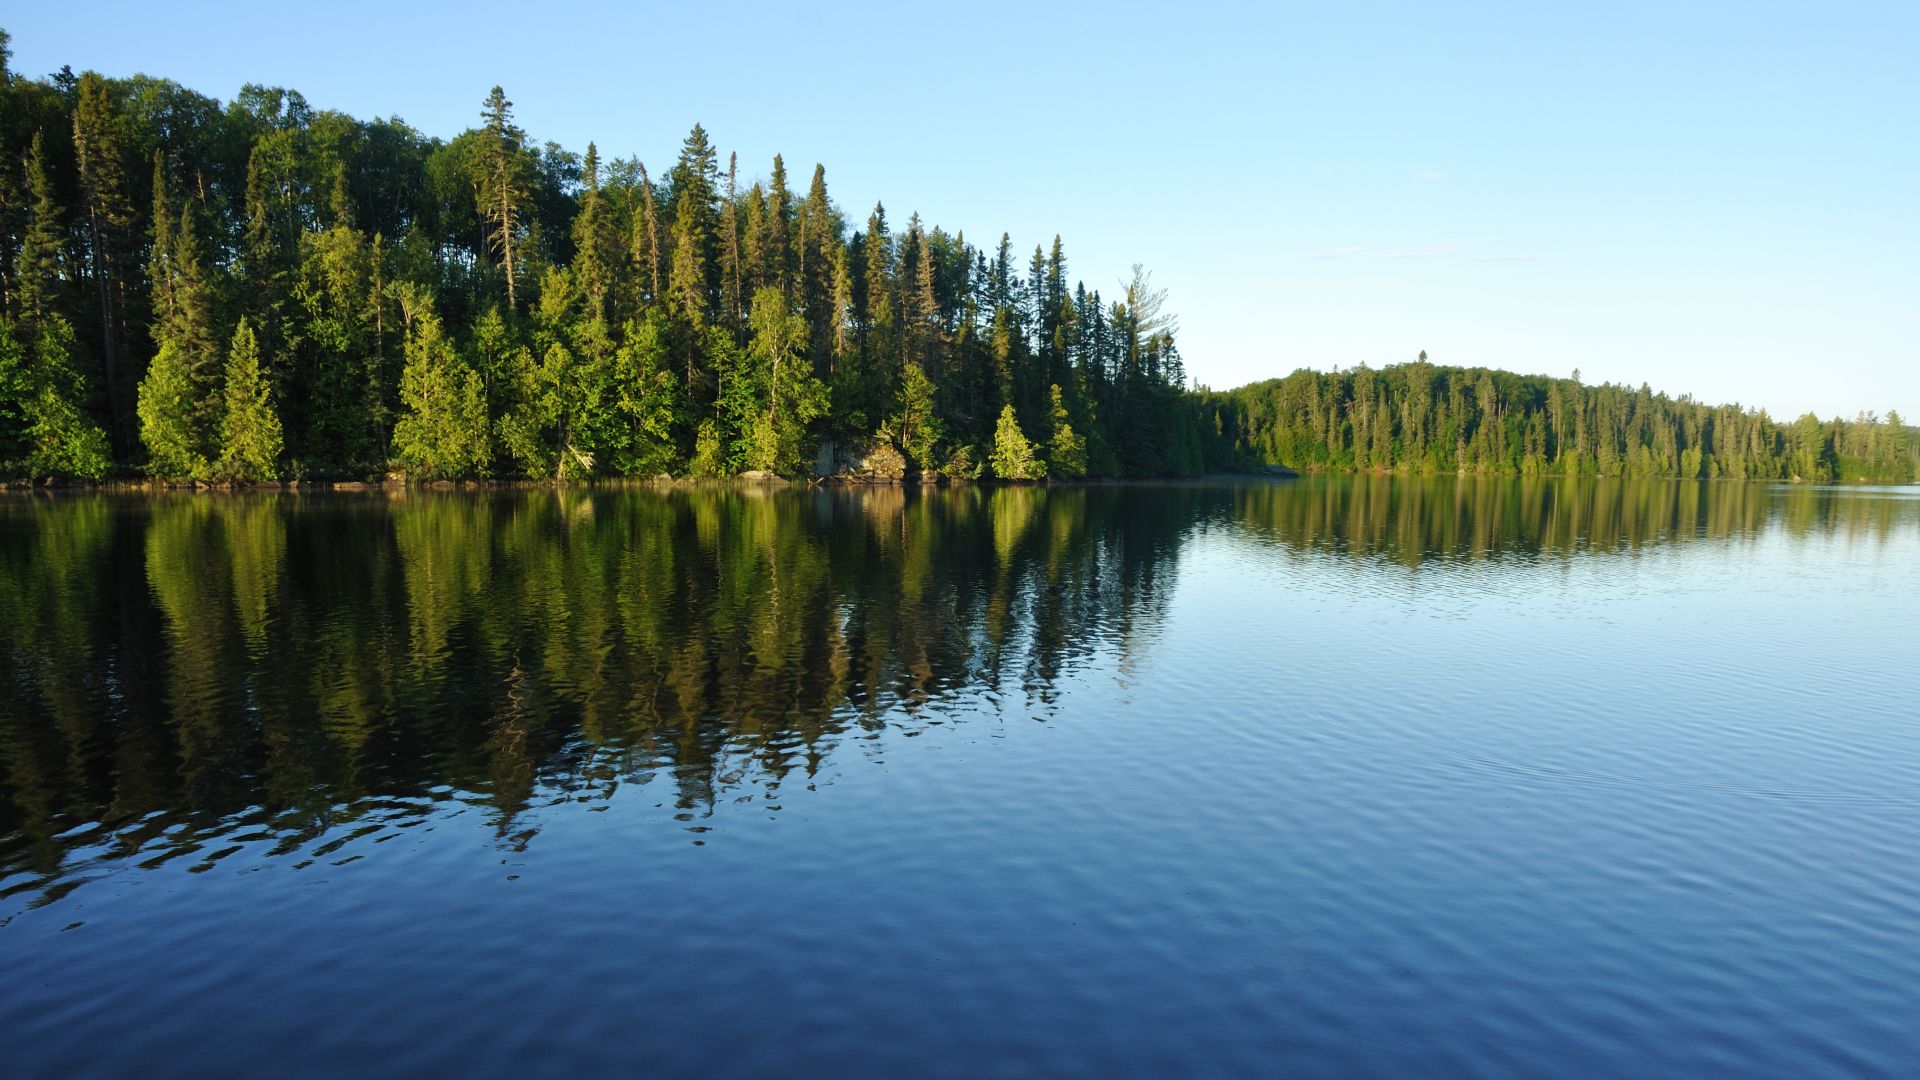 A Large Body Of Water Surrounded By Trees